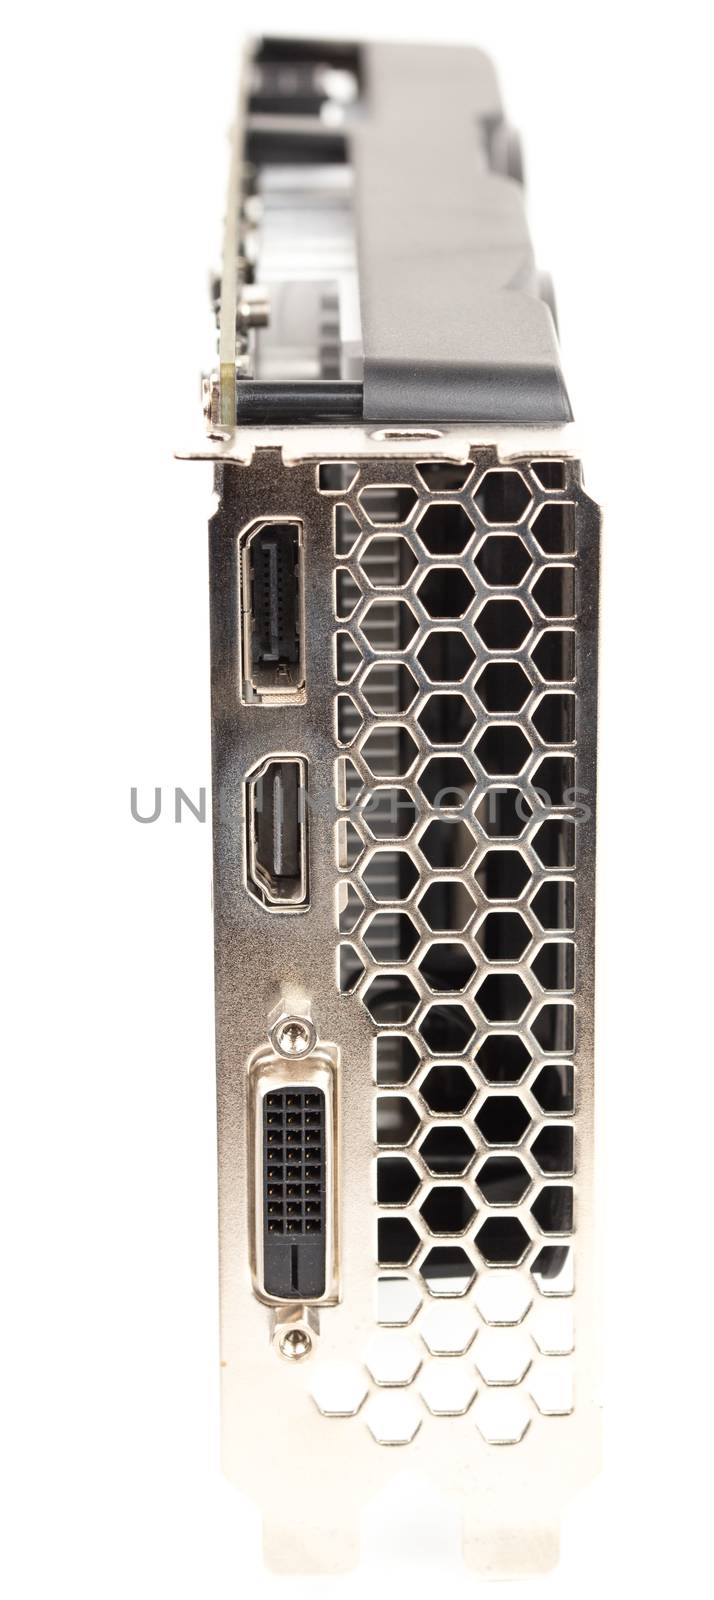 closeup view of modern video card's external connectors with selective focus and isolated on white background.